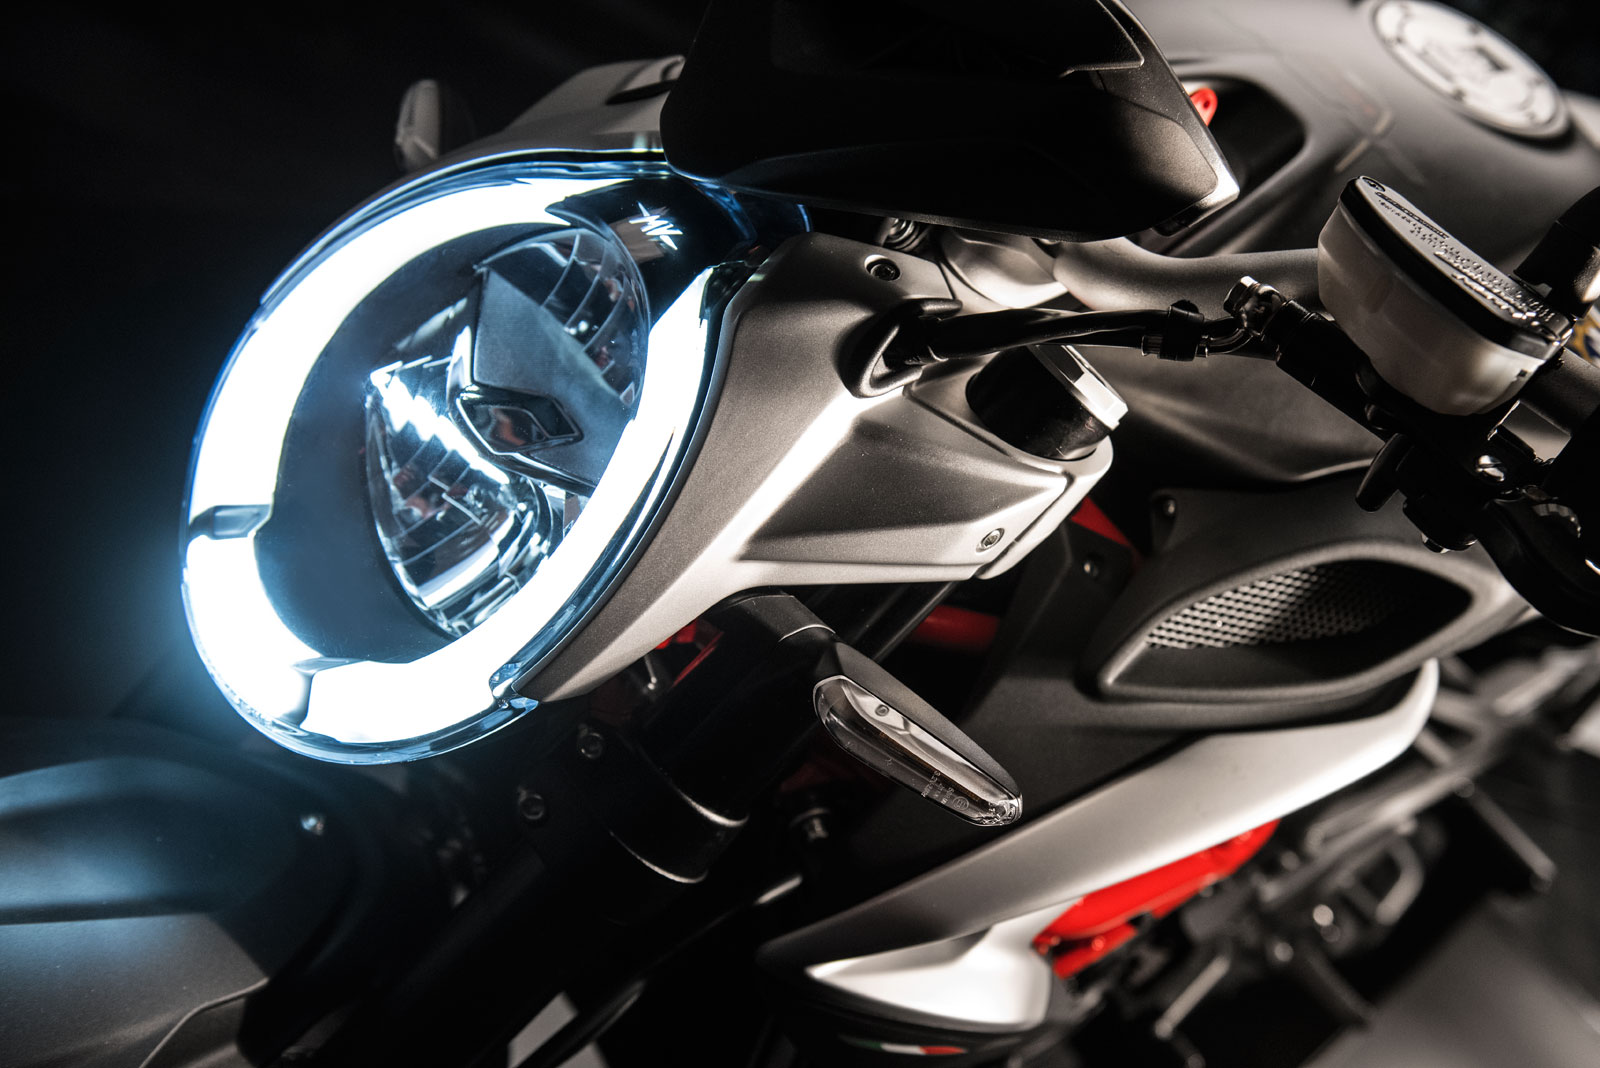 2017 MV Agusta Brutale 800 with LED headlamp and DRLs